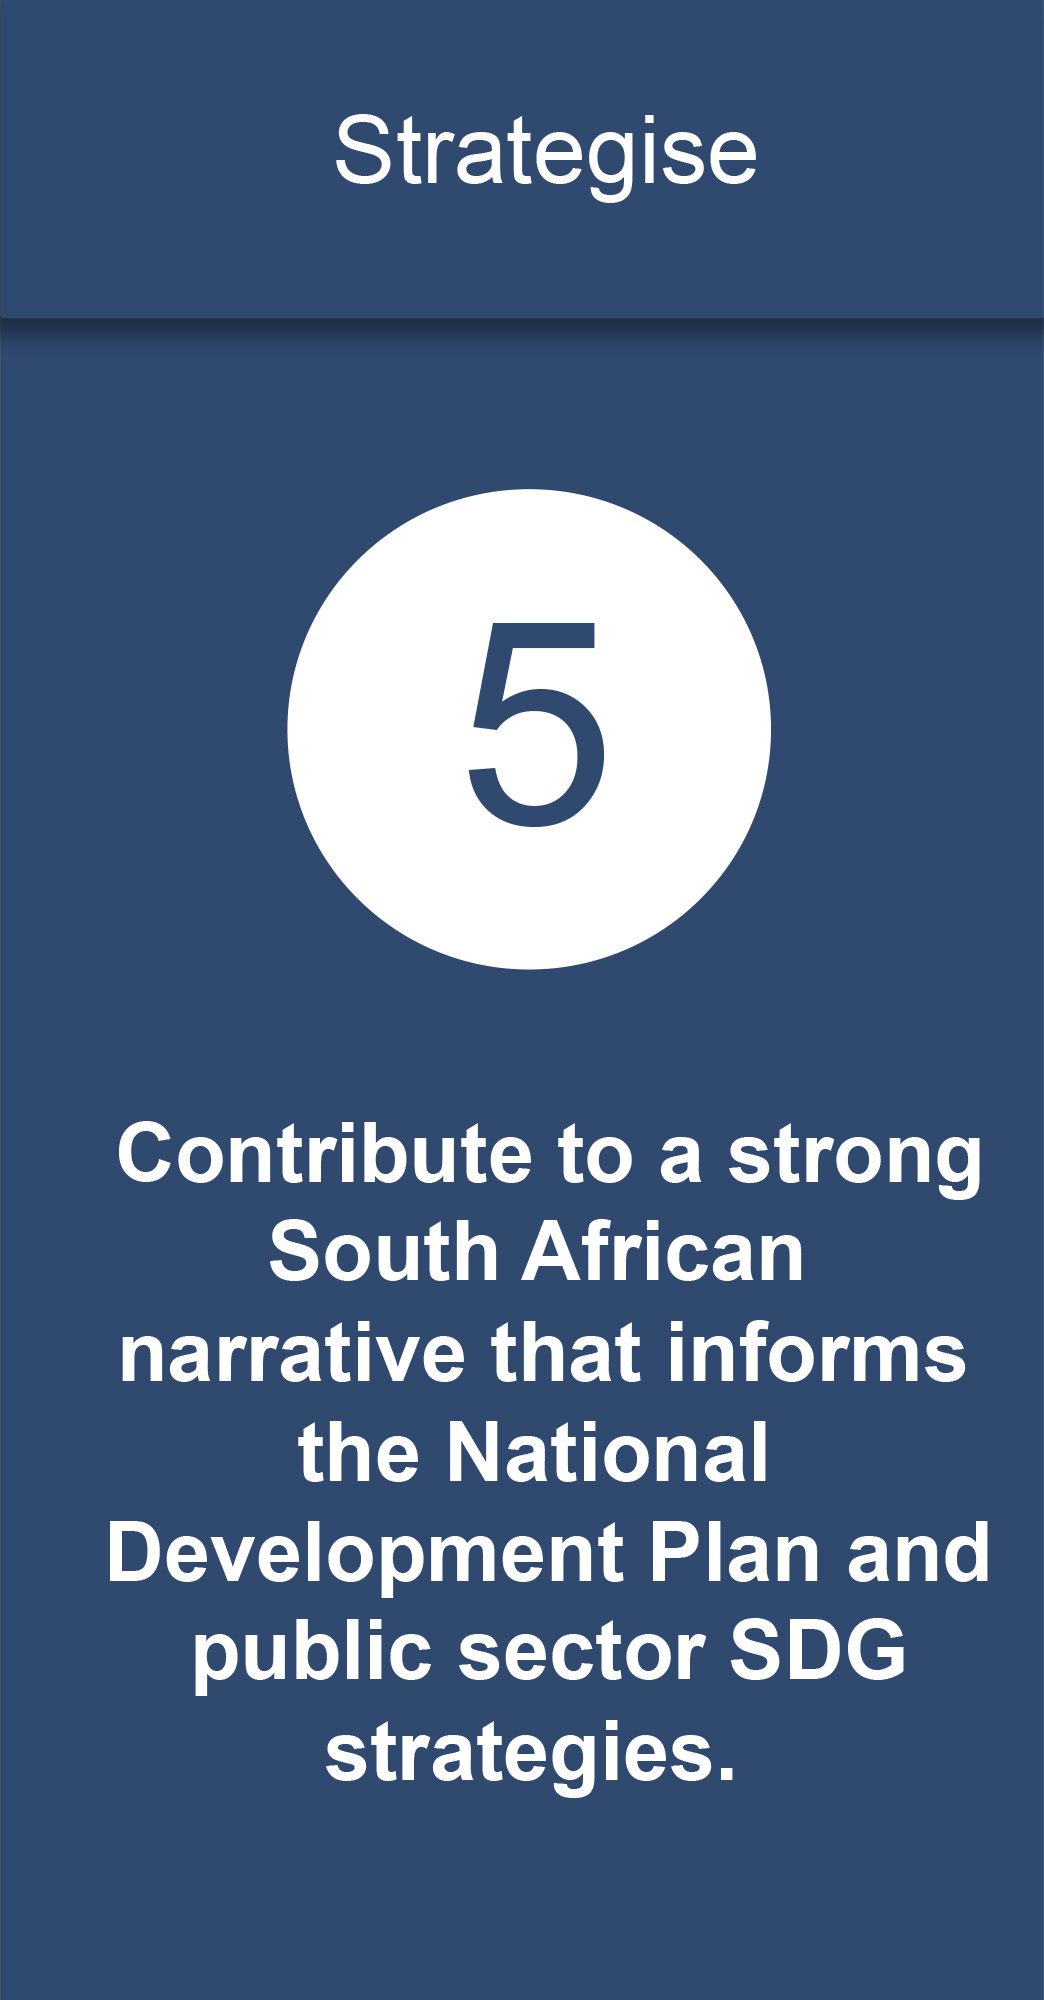 Contribute to a strong South African narrative that informs the National Development Plan and public sector SDG strategies.